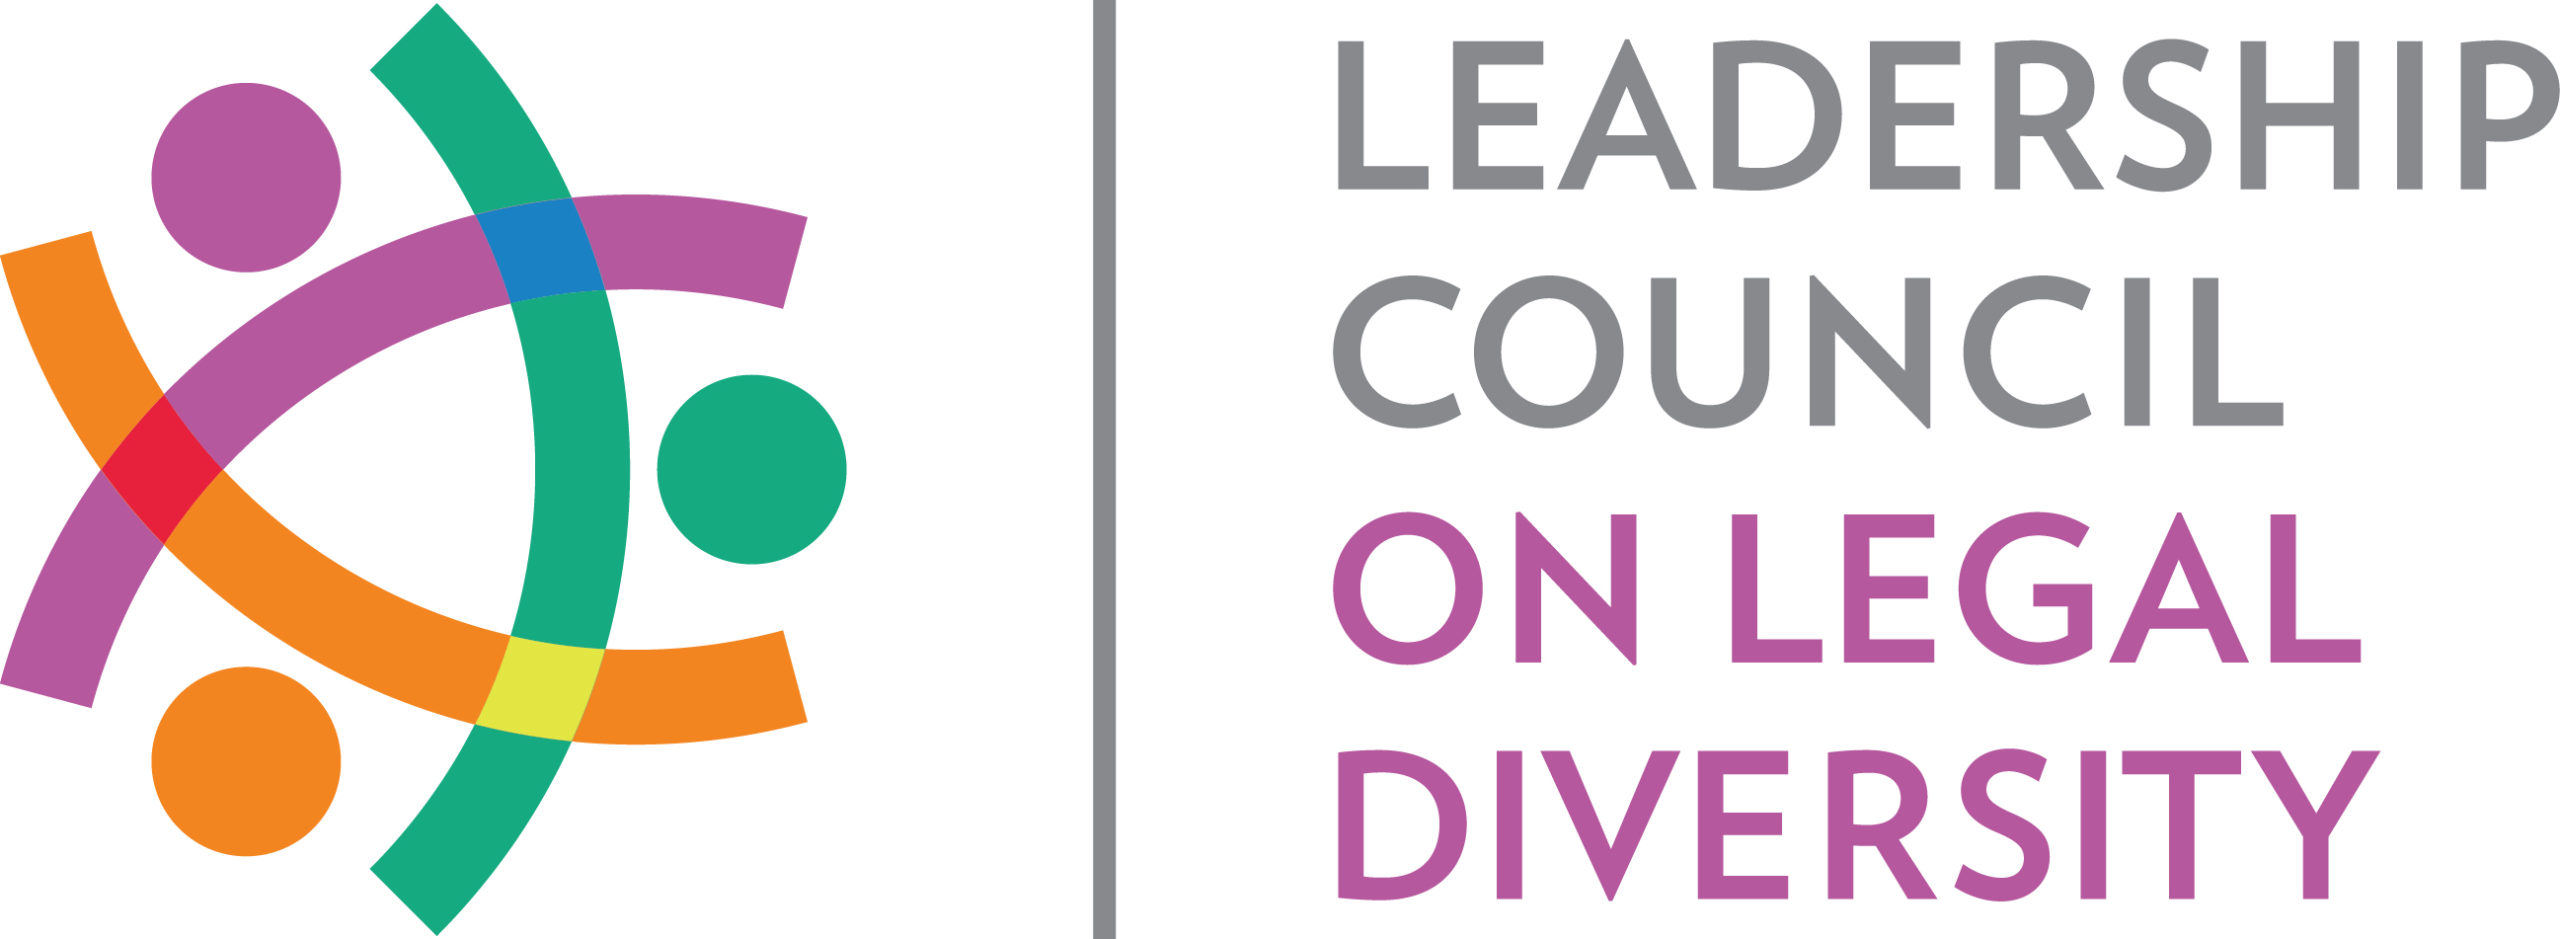 The Leadership Council on Legal Diversity logo